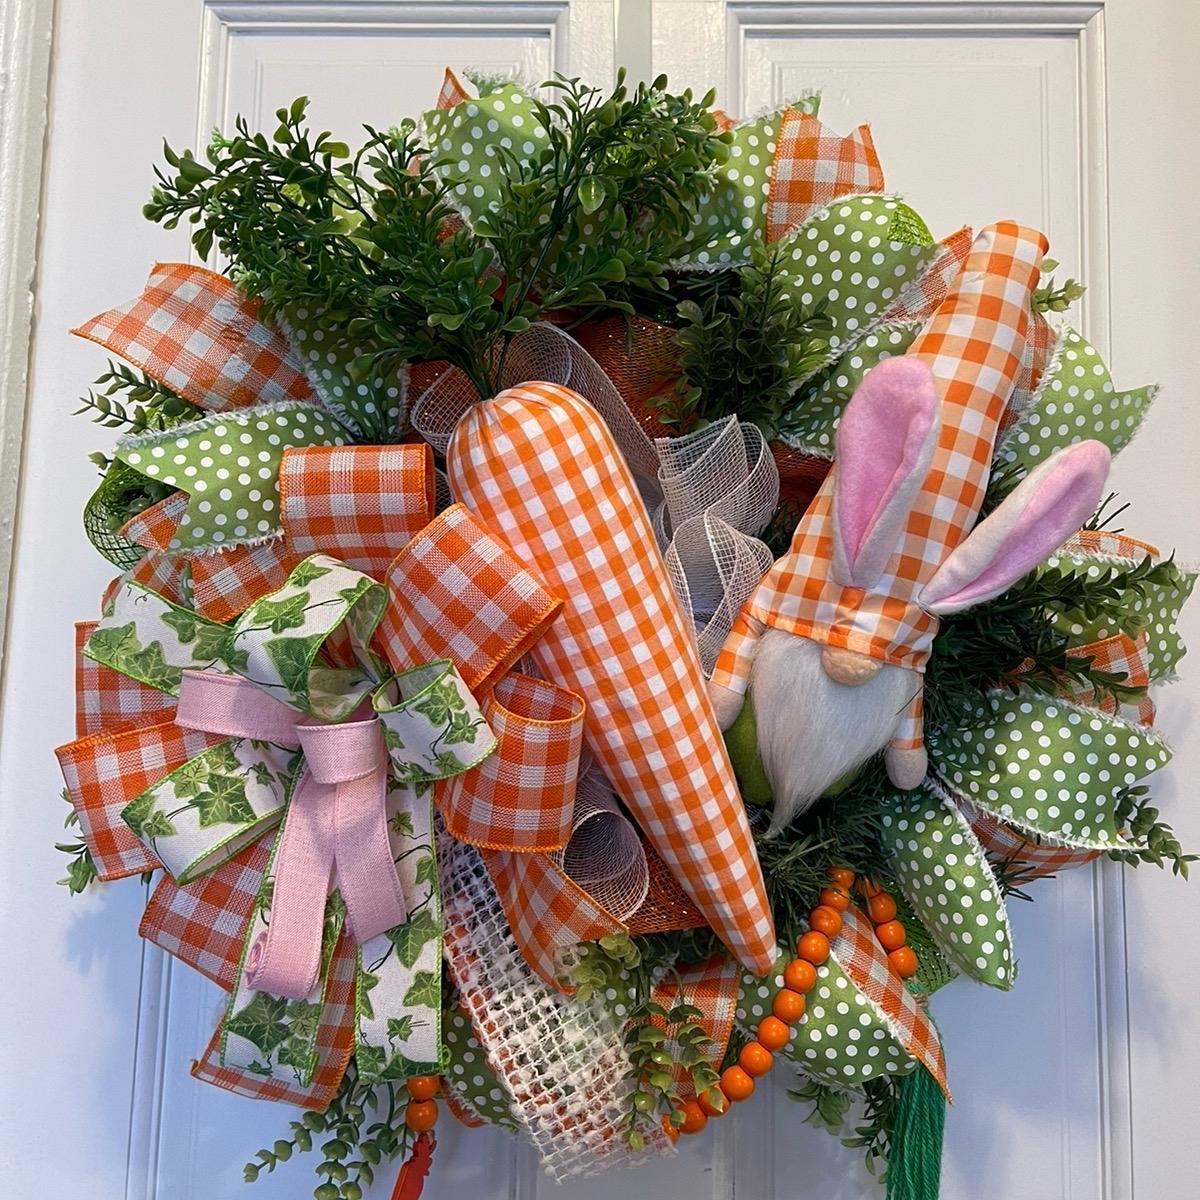 Gnome and Carrot Wreath